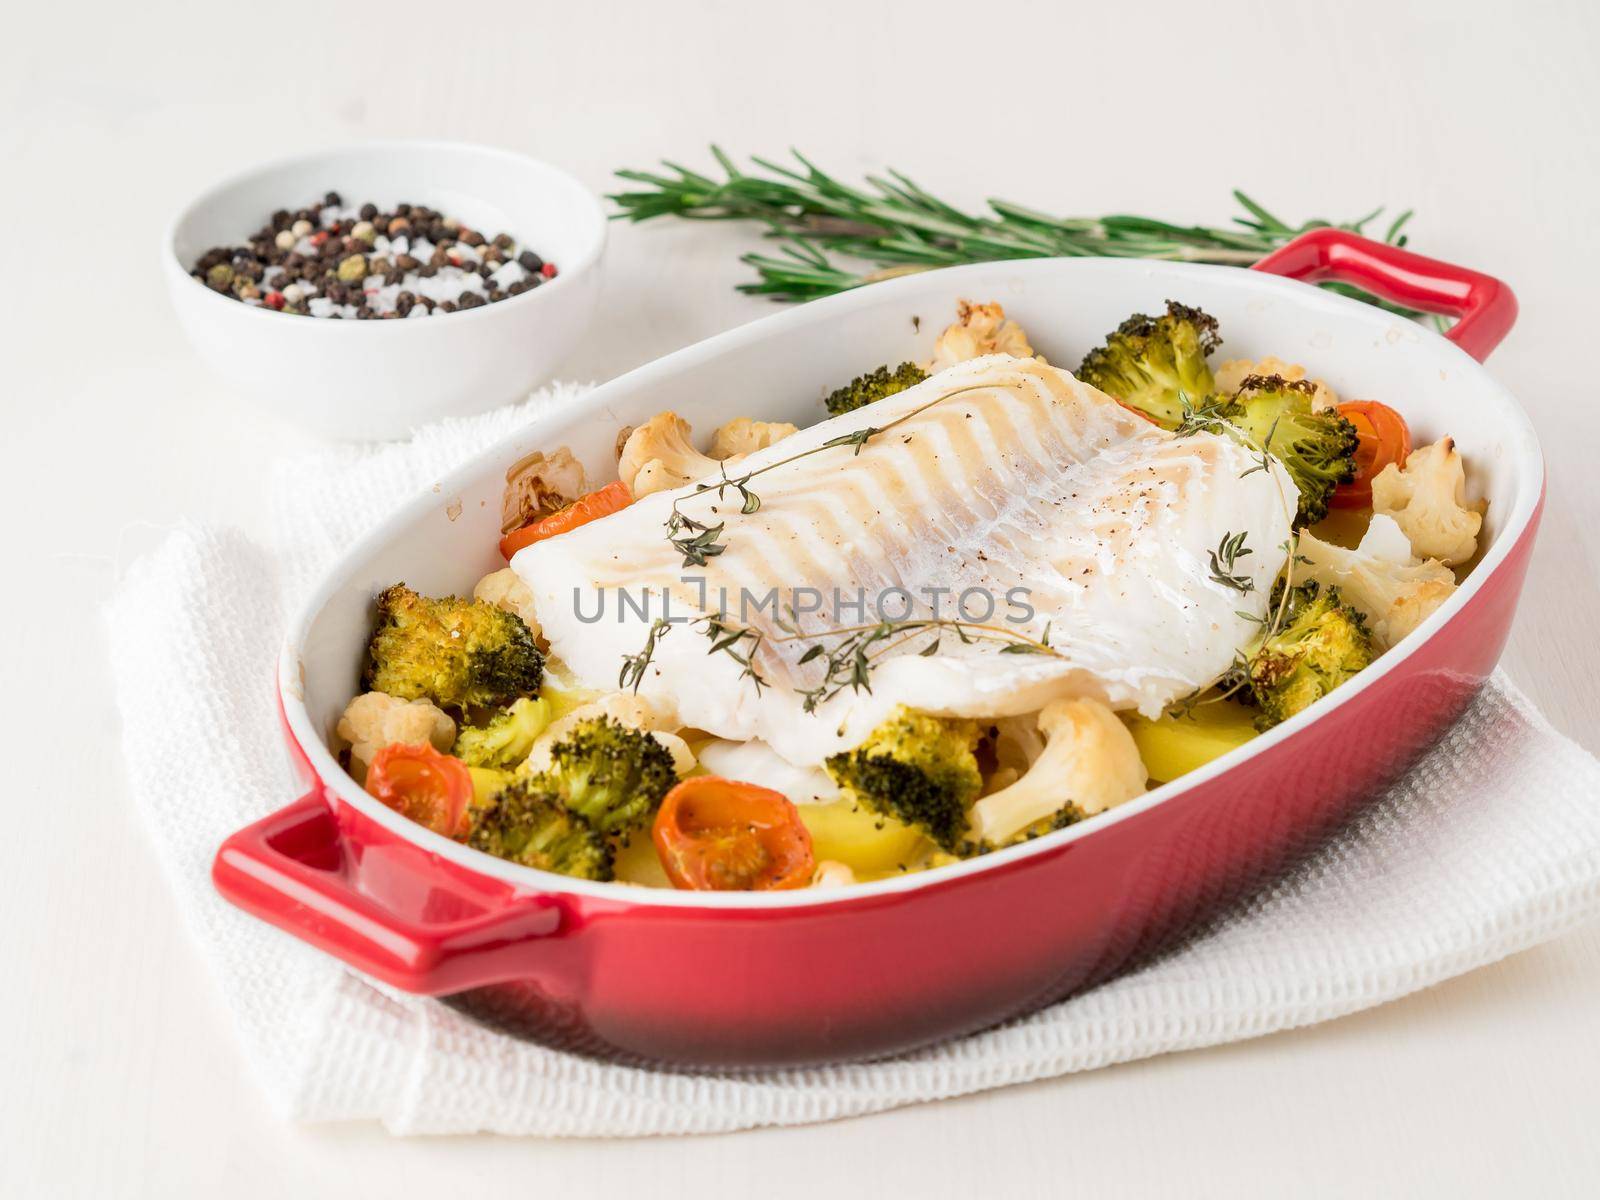 Fish cod baked in the oven with vegetables - healthy diet healthy food. Light white wooden background, side view. by NataBene